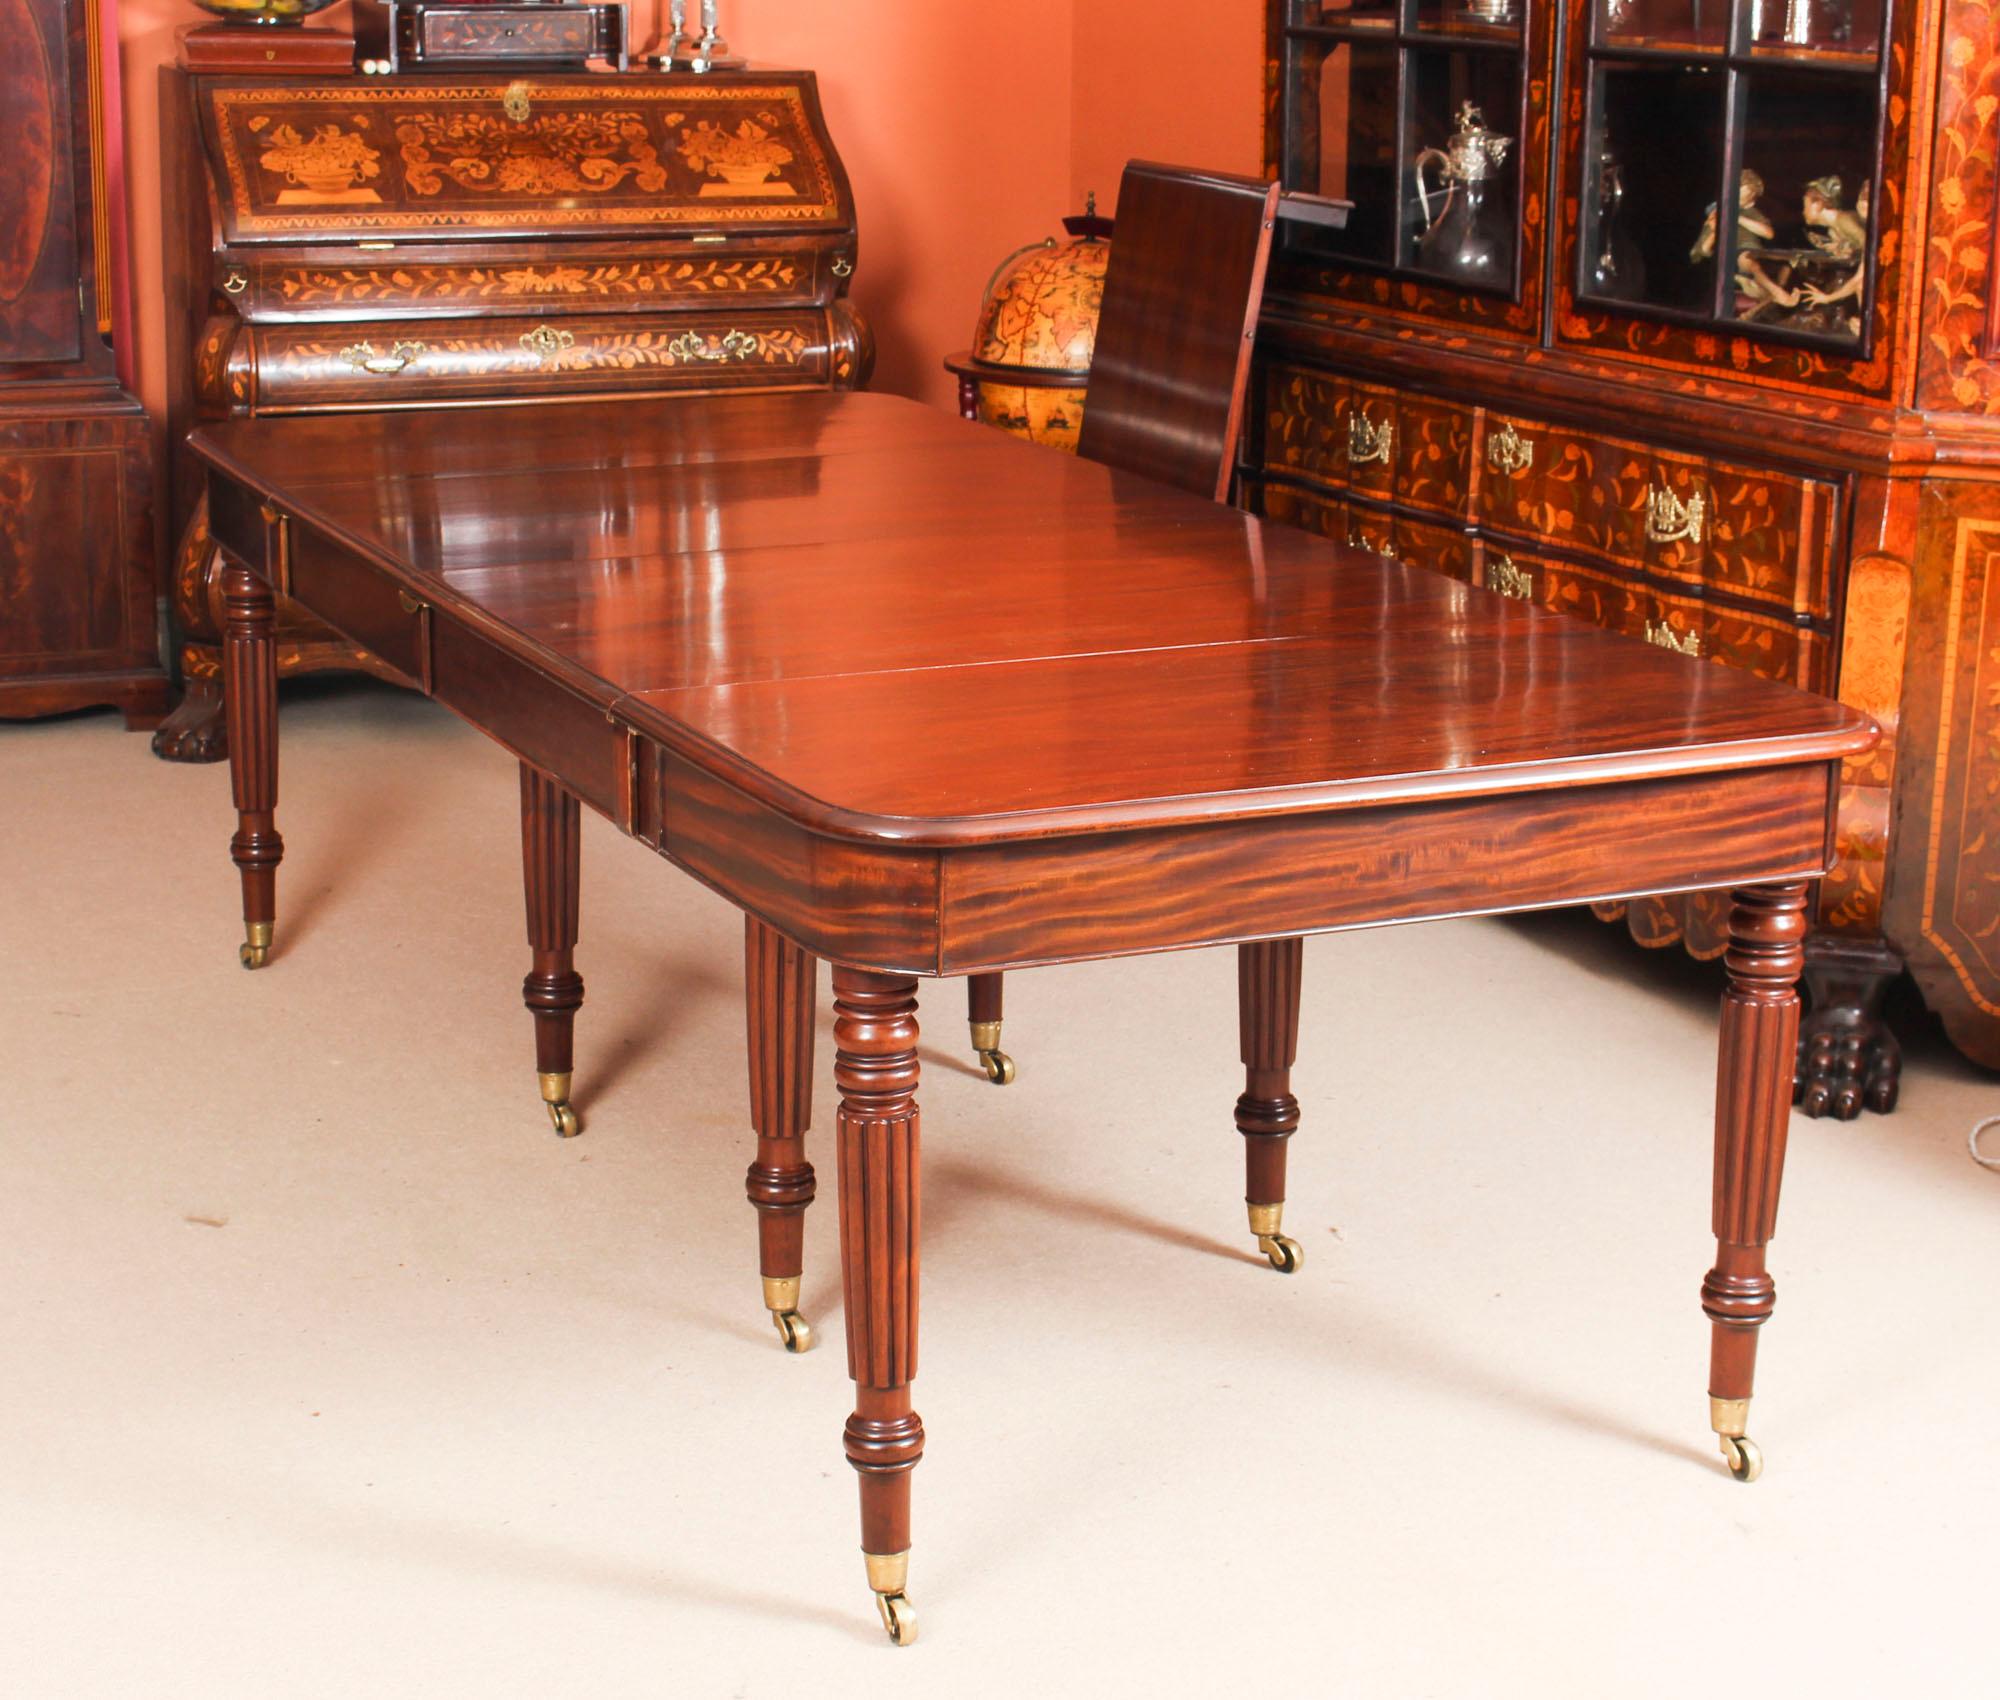 Early 19th Century Antique Regency Flame Mahogany Dining Table Manner of Gillows, 19th Century